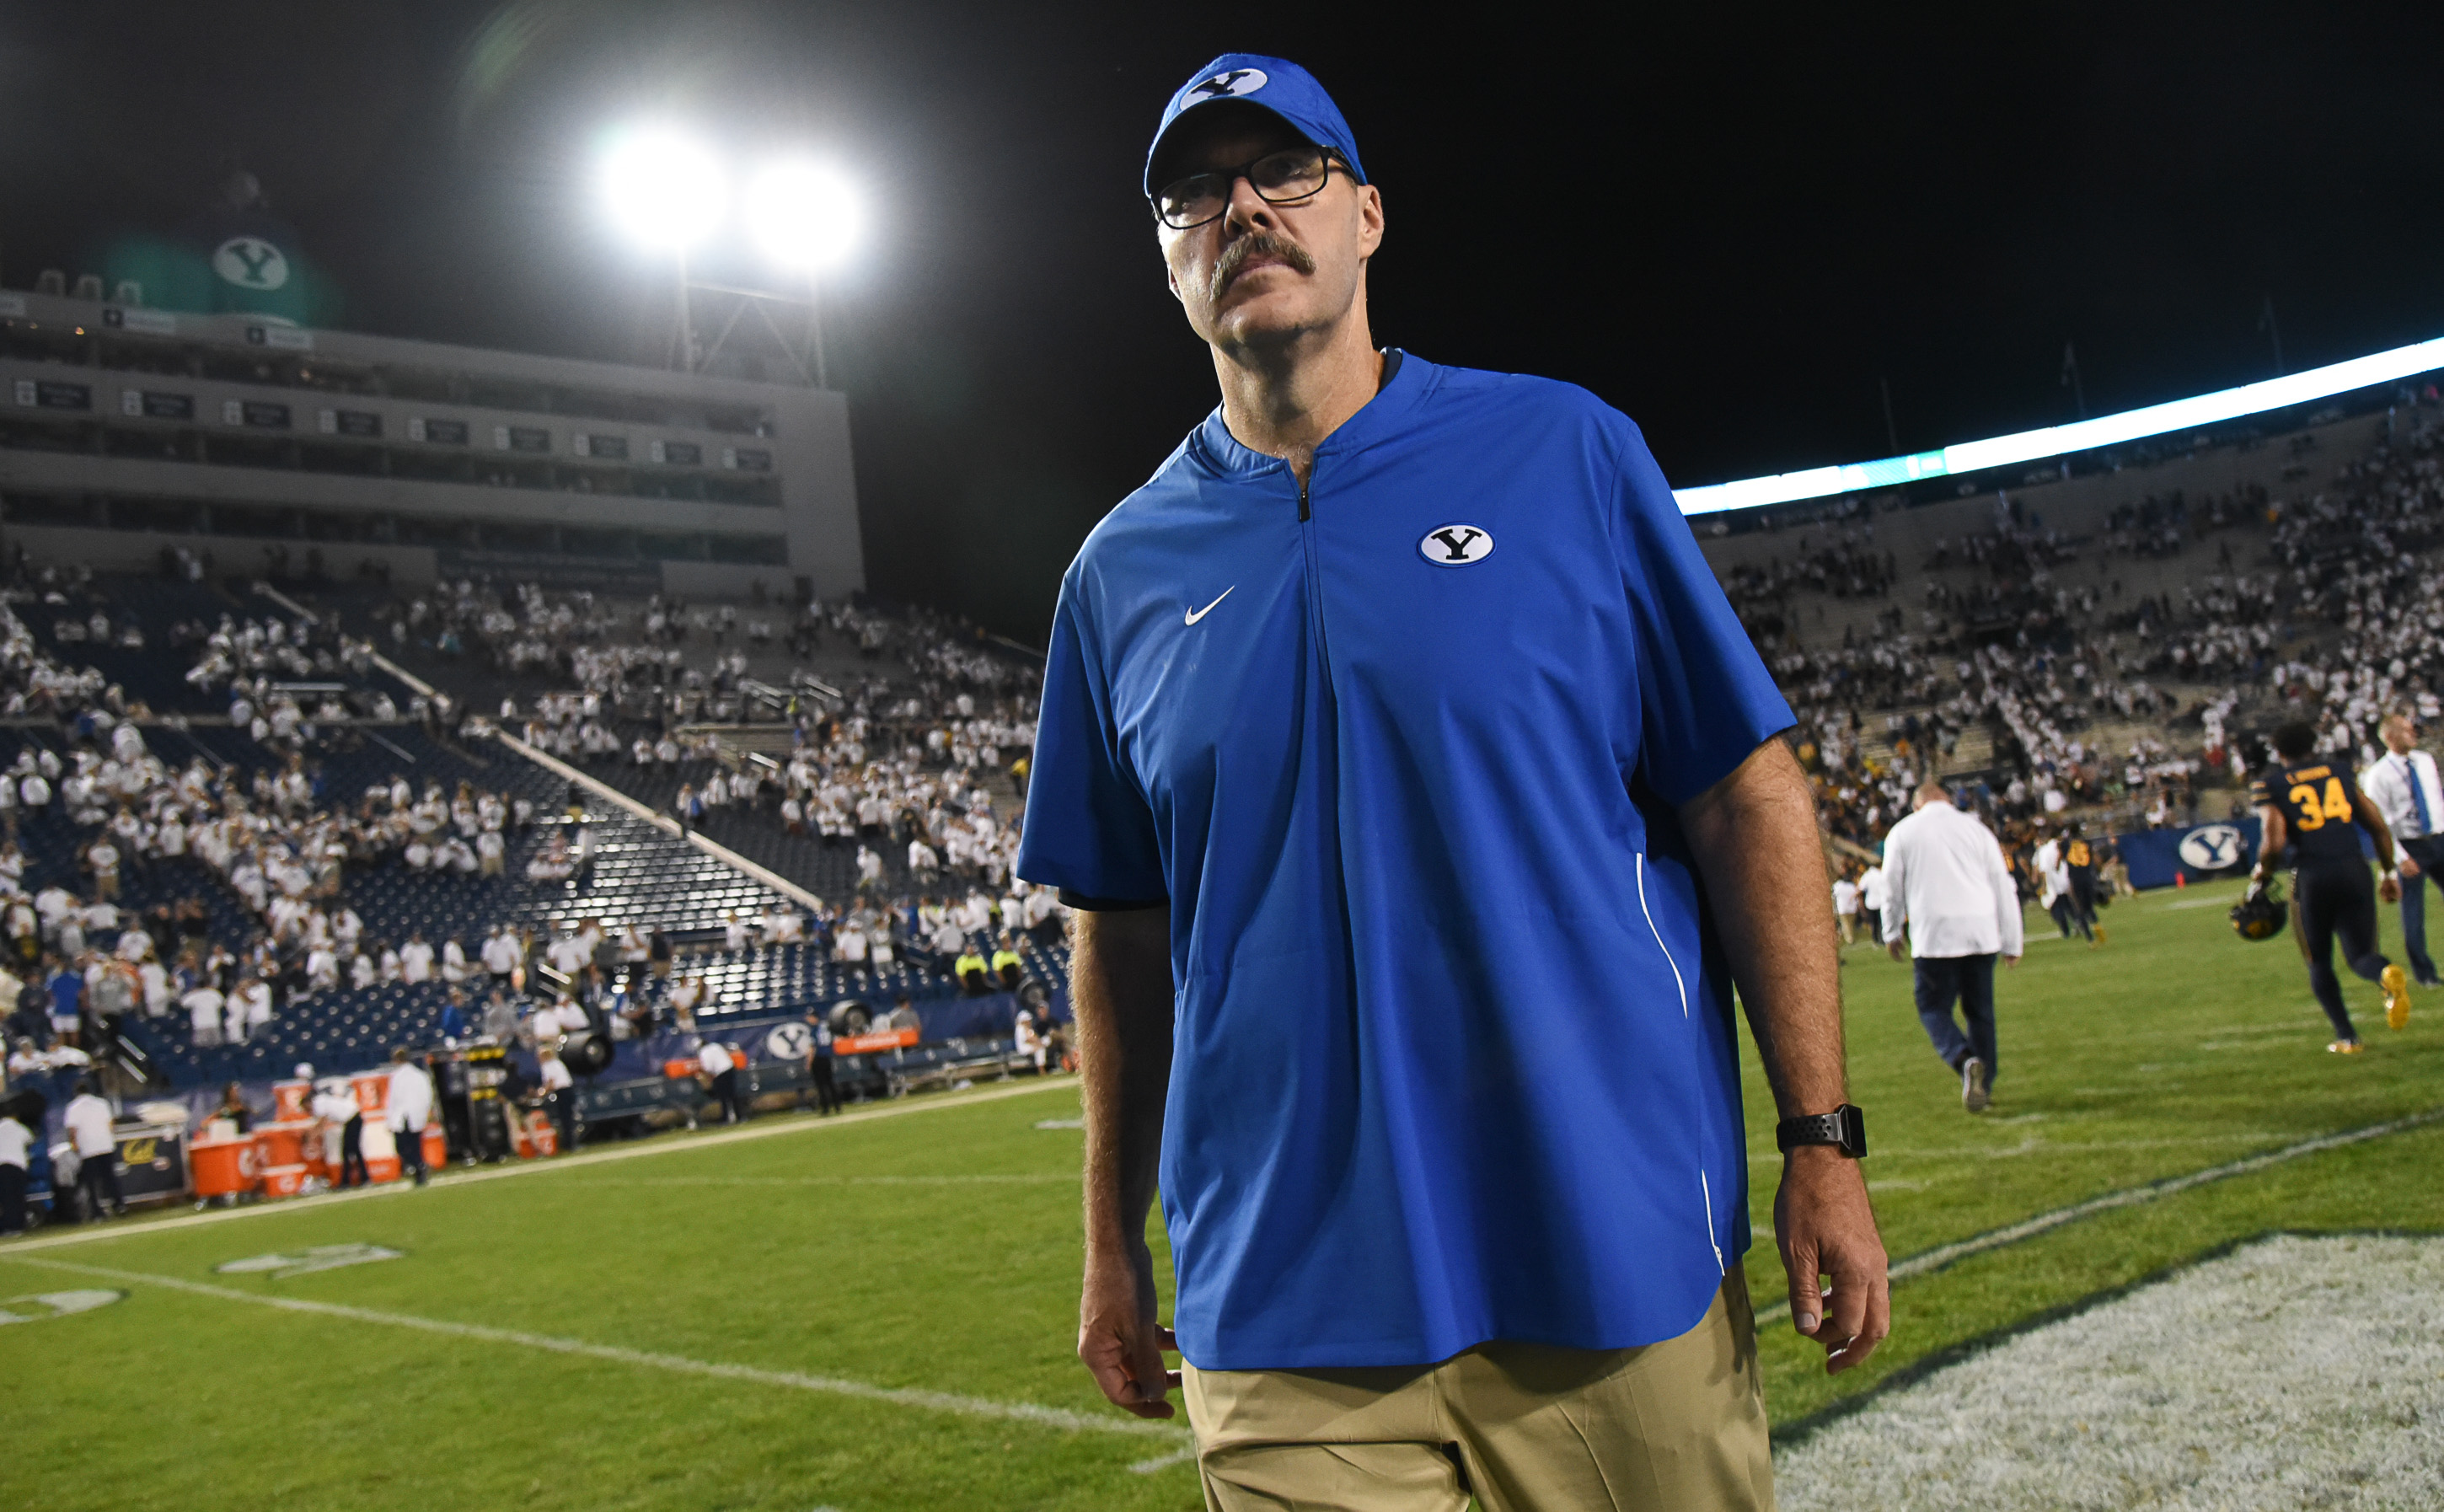 BYU offensive coordinator Jeff Grimes is headed to Baylor